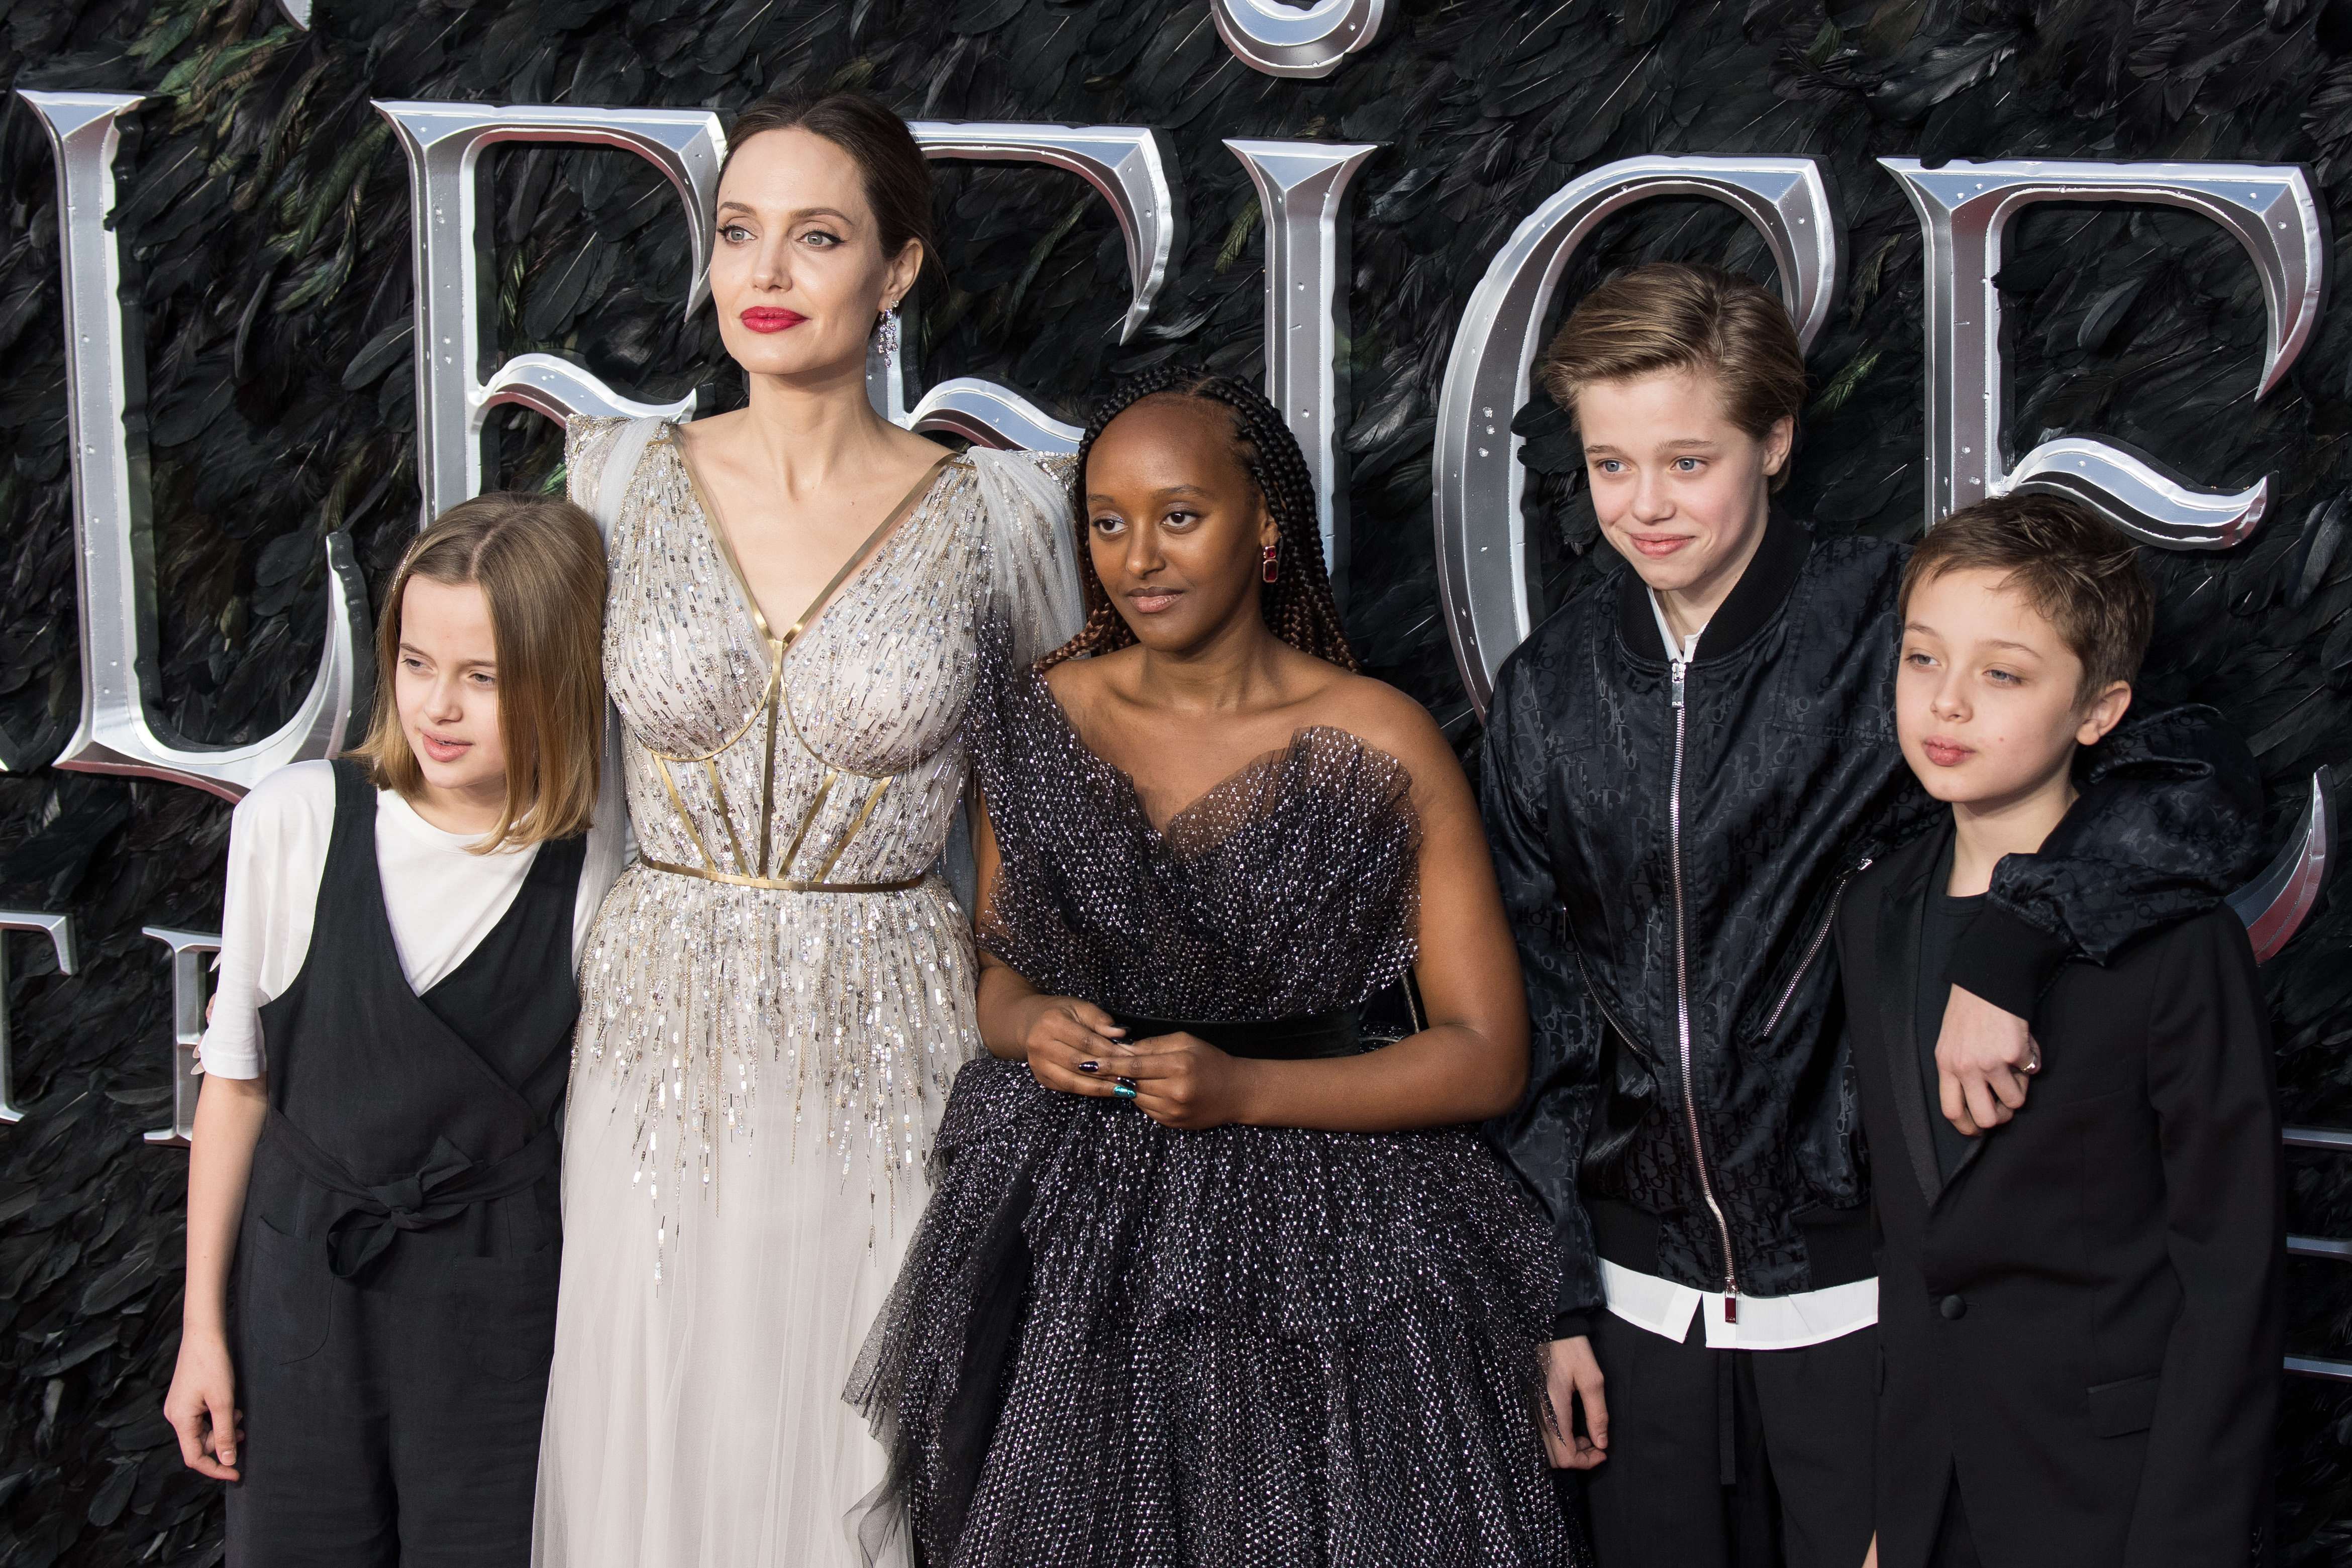 Vivienne, Angelina Jolie, Zahara, Shiloh, and Knox Jolie-Pitt attend the European premiere of "Maleficent: Mistress of Evil" at Odeon IMAX Waterloo in London, England, on October 9, 2019. | Source: Getty Images